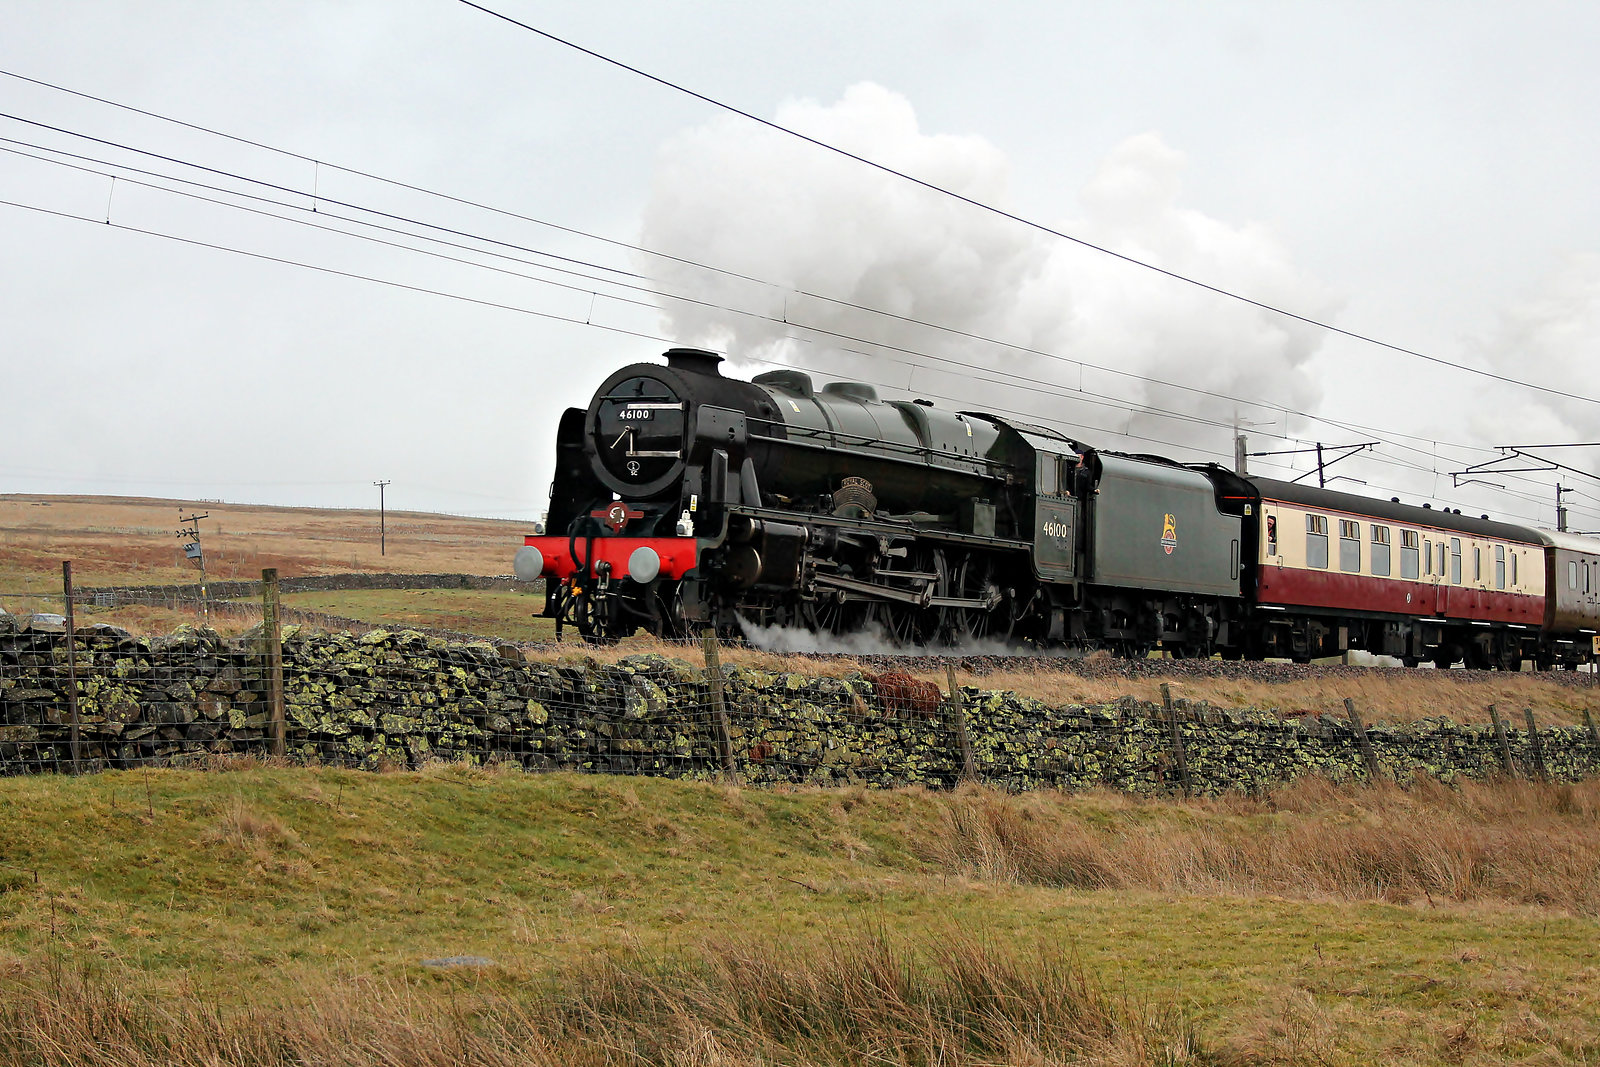 Stanier LMS class 7P Royal Scot 46100 ROYAL SCOT at Salterwath with 1Z20 05.50 Rugby - Carlisle at Salterwath 11th February 2023.